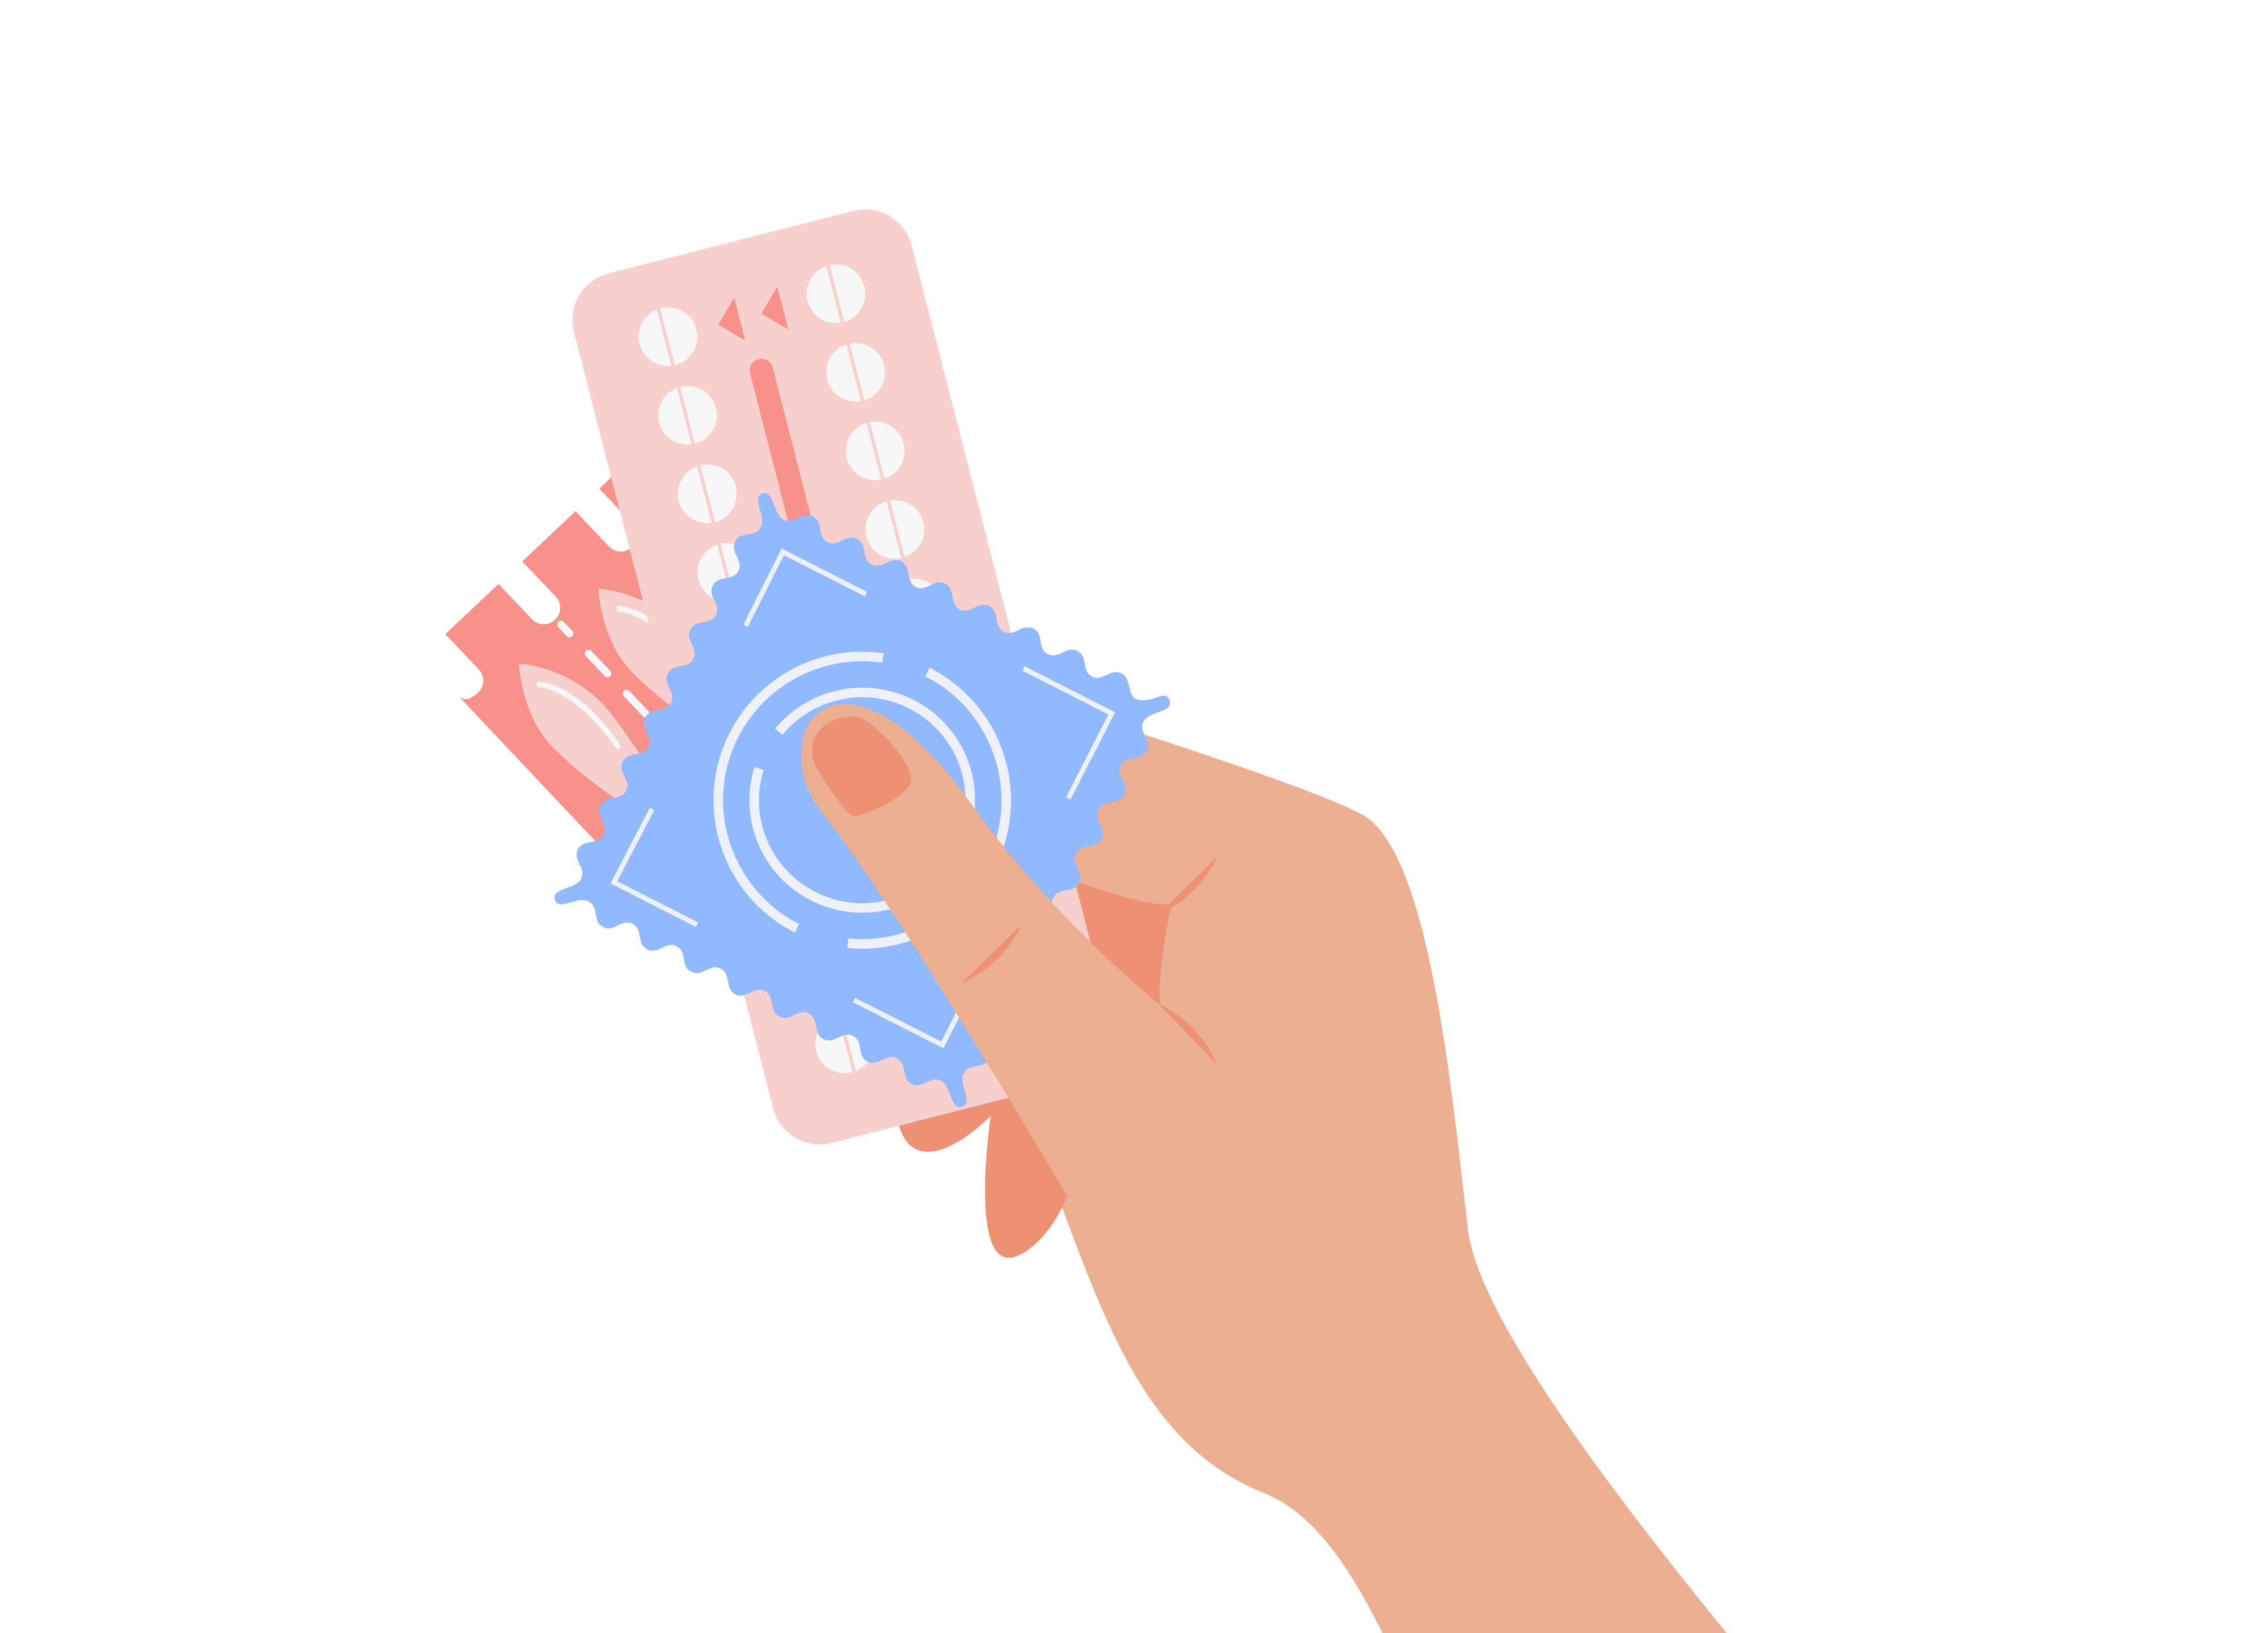 person holding in hand different types of contraception birth control methods concept condom and hormonal contraceptive pills for safe sex vector flat illustration isolated on white background